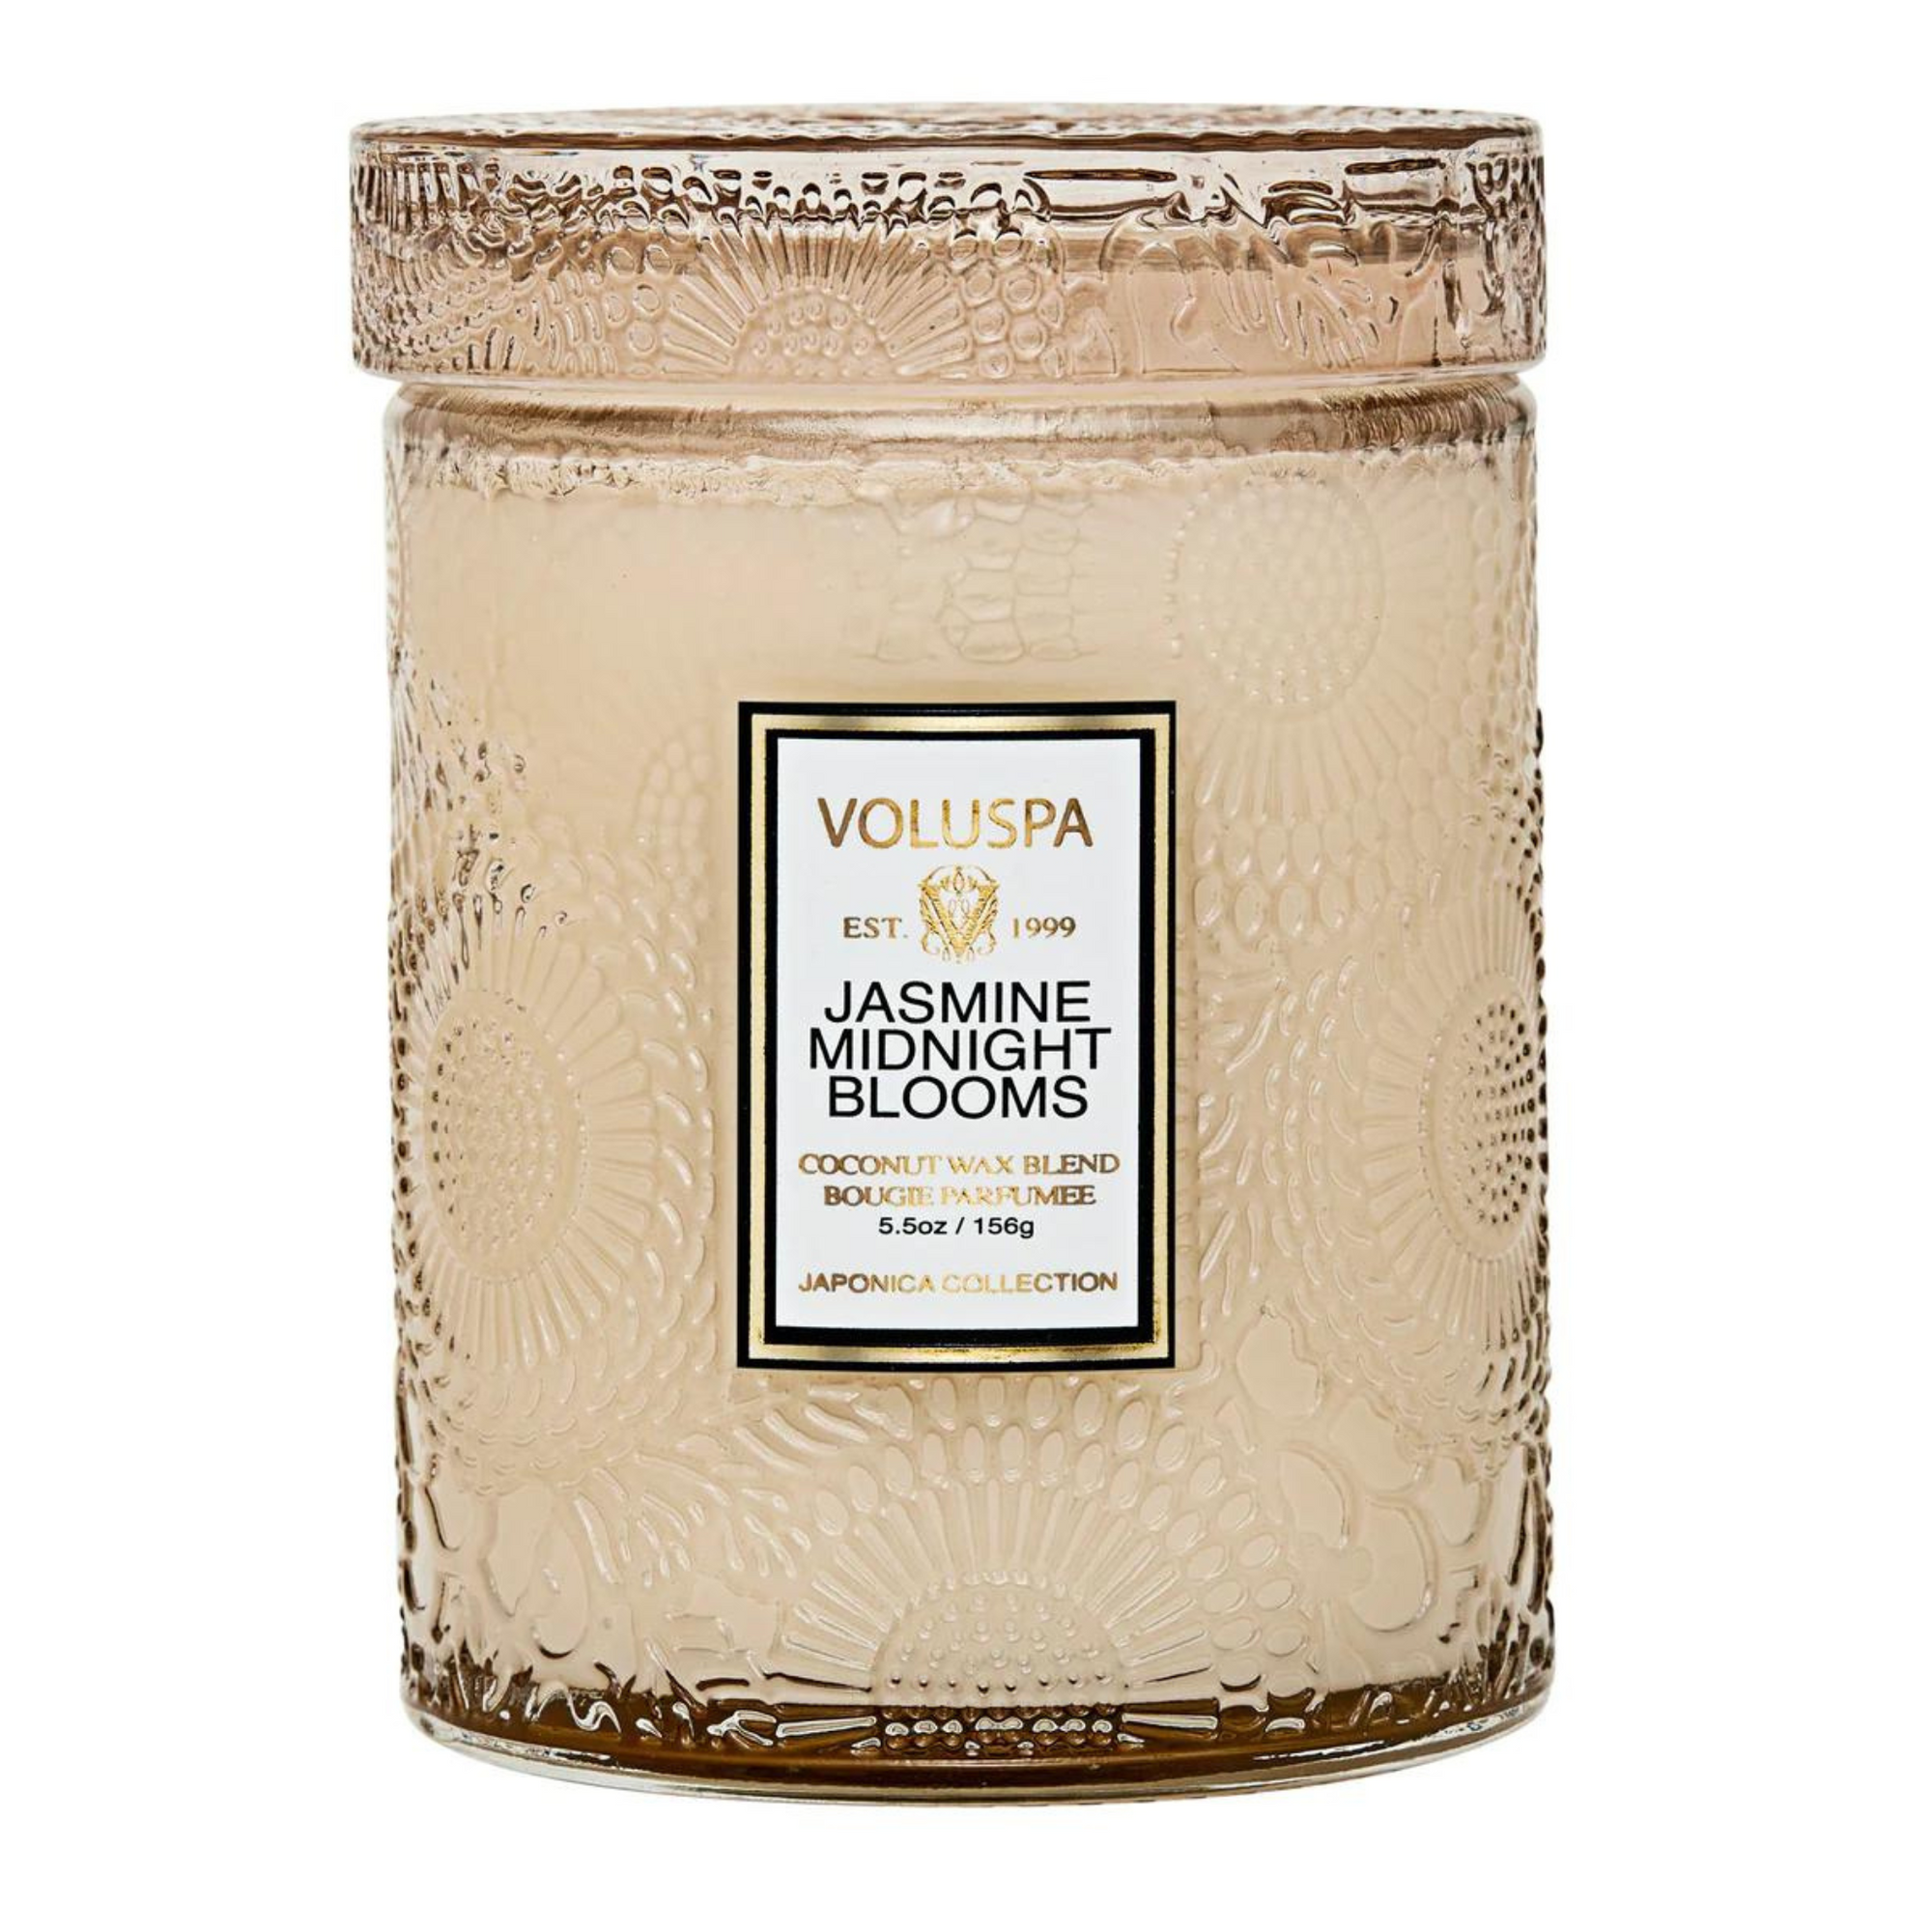 Jasmine Midnight Blooms - Small Candle